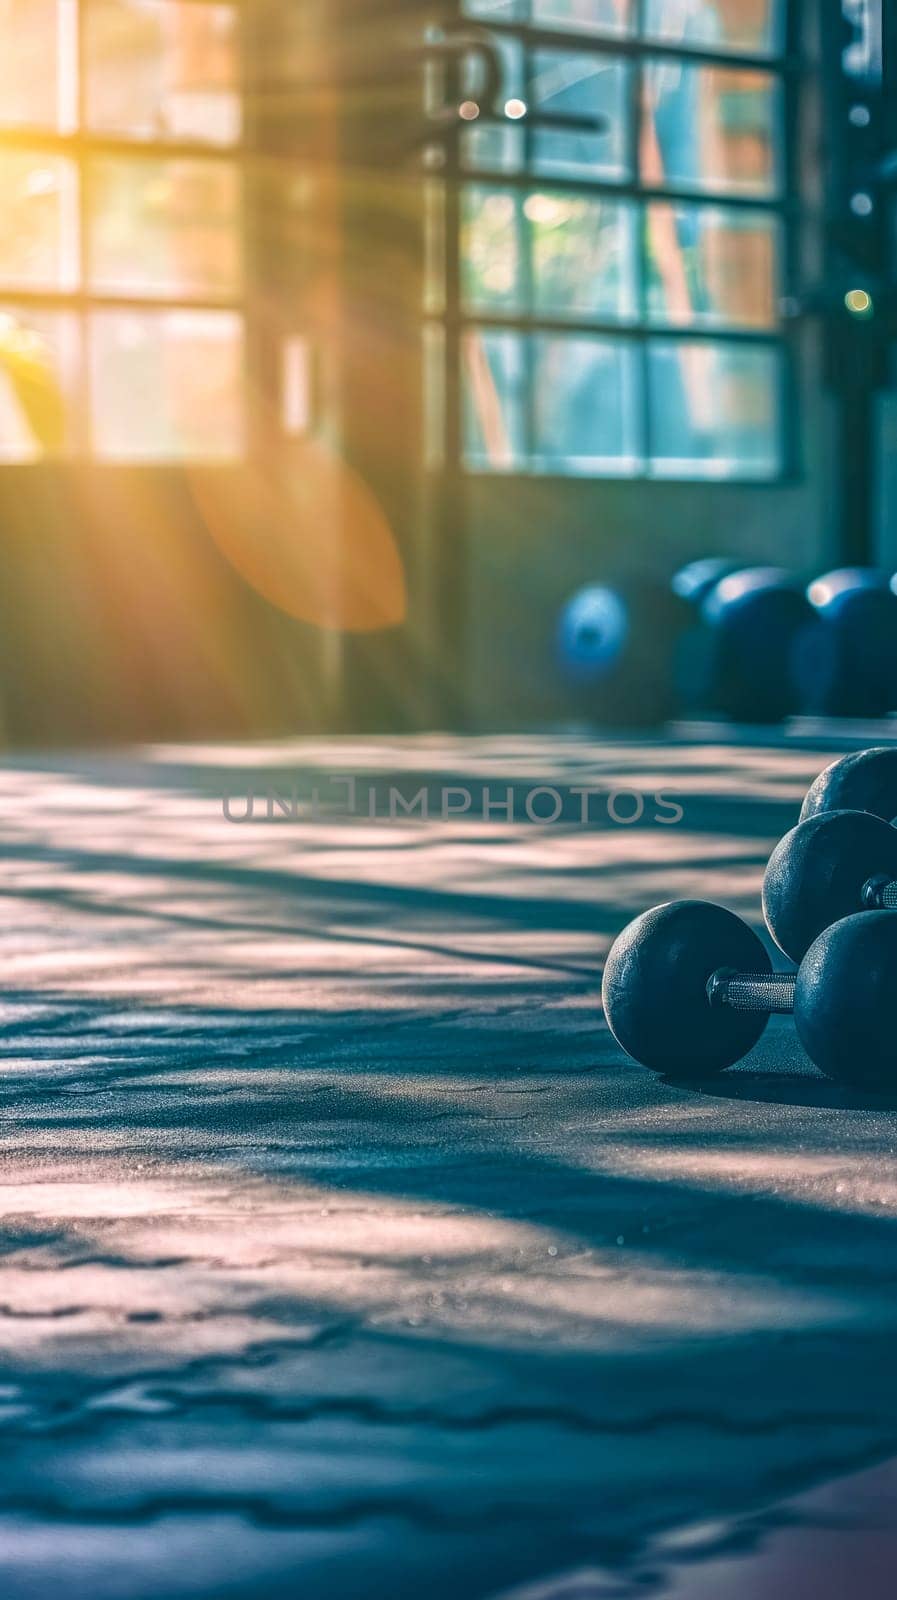 gym during sunrise, with sunlight streaming through the window and casting a warm glow over the dumbbells and textured floor, symbolizing dedication and tranquility in fitness, vertical, copy space